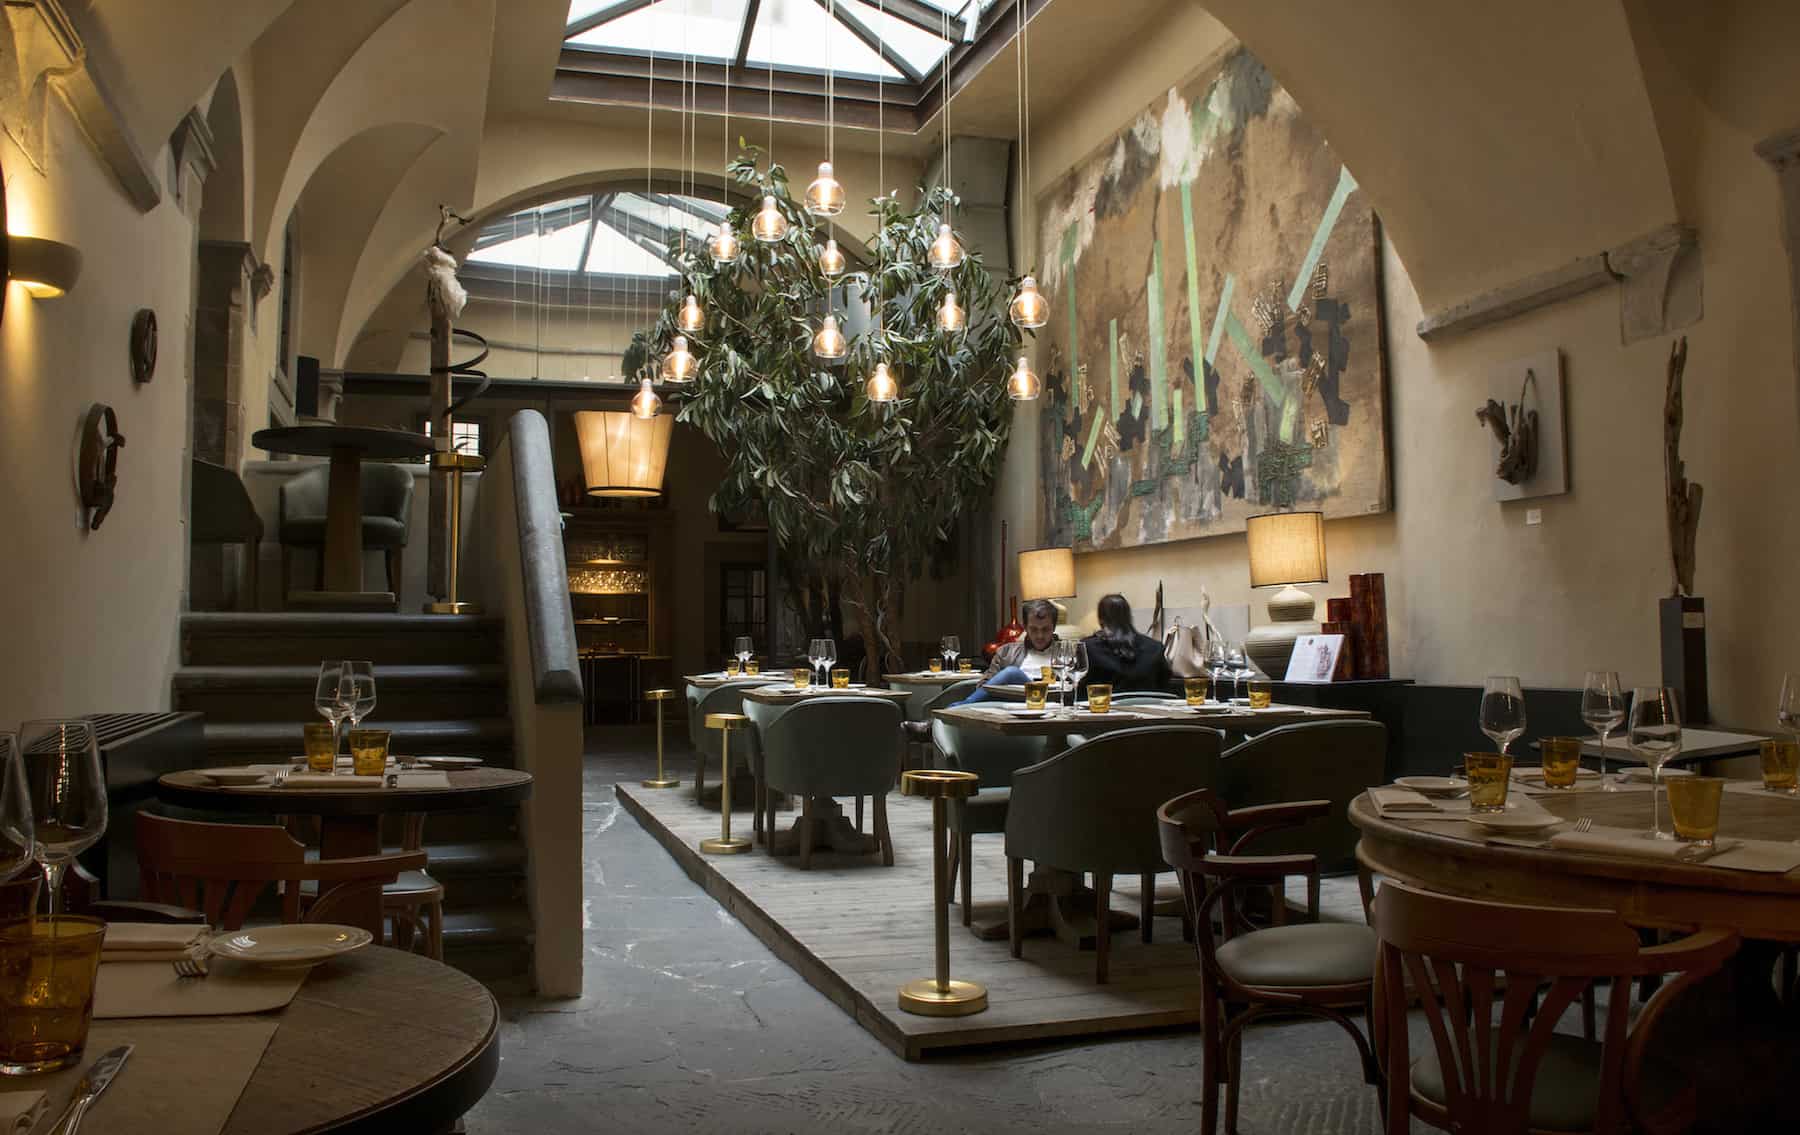 Inside Florence's beautiful Konnubio restaurant with its glass ceiling and and artworks.